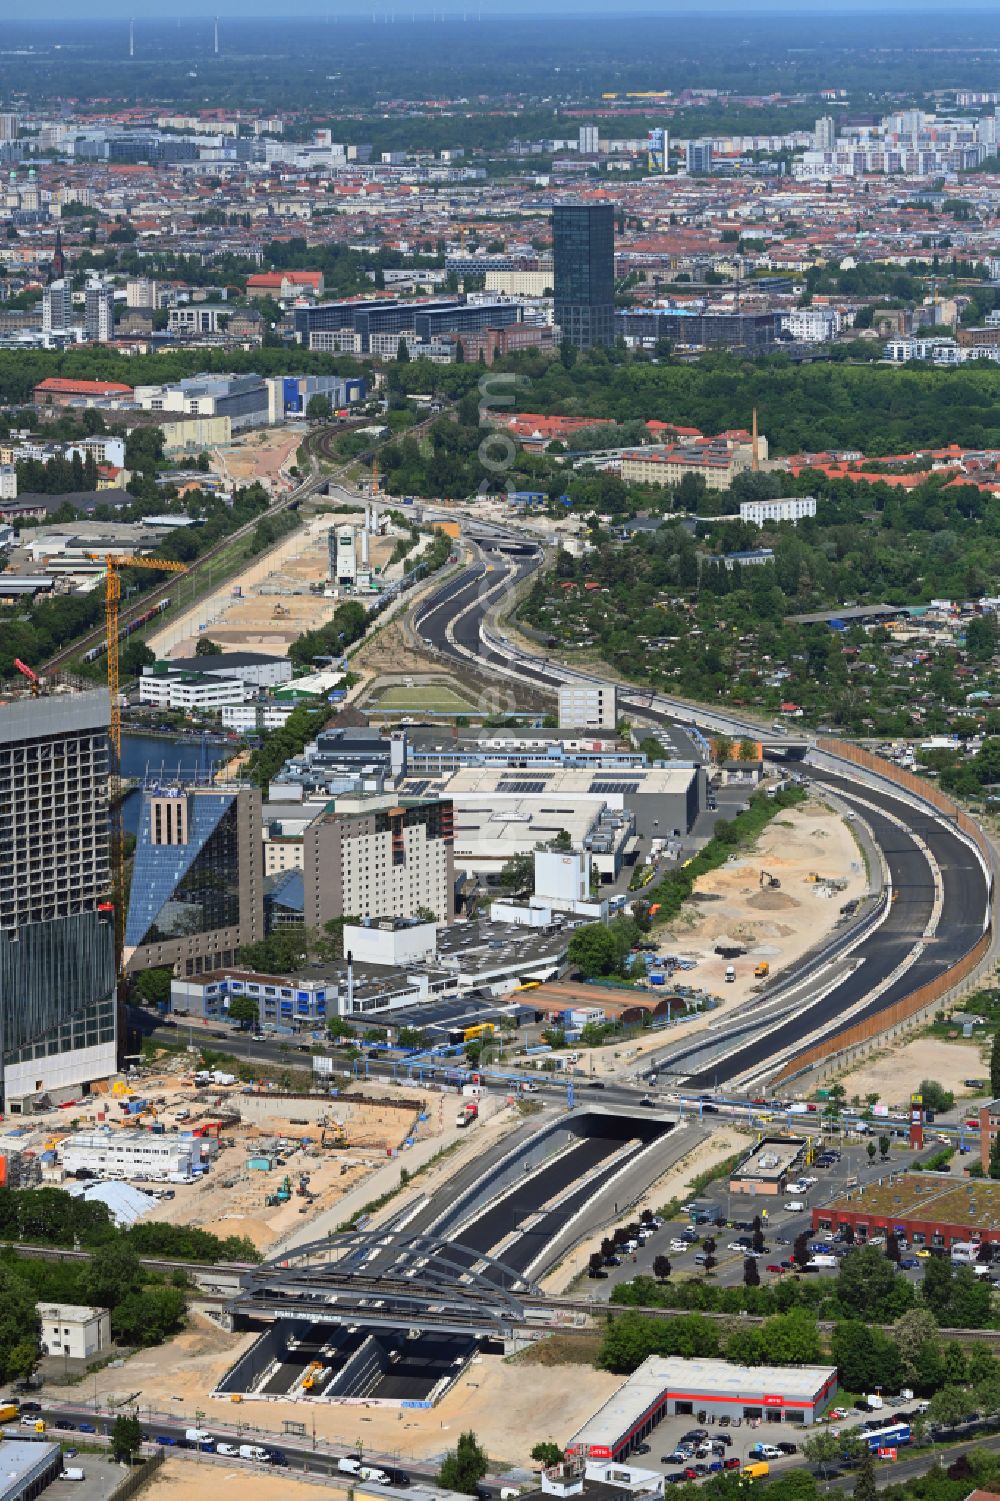 Berlin from above - Civil engineering construction sites - route for the new construction of the tunnel structures to extend the city motorway - federal motorway BAB A100 on the Neukoellnische Allee street in the Neukoelln district in Berlin, Germany